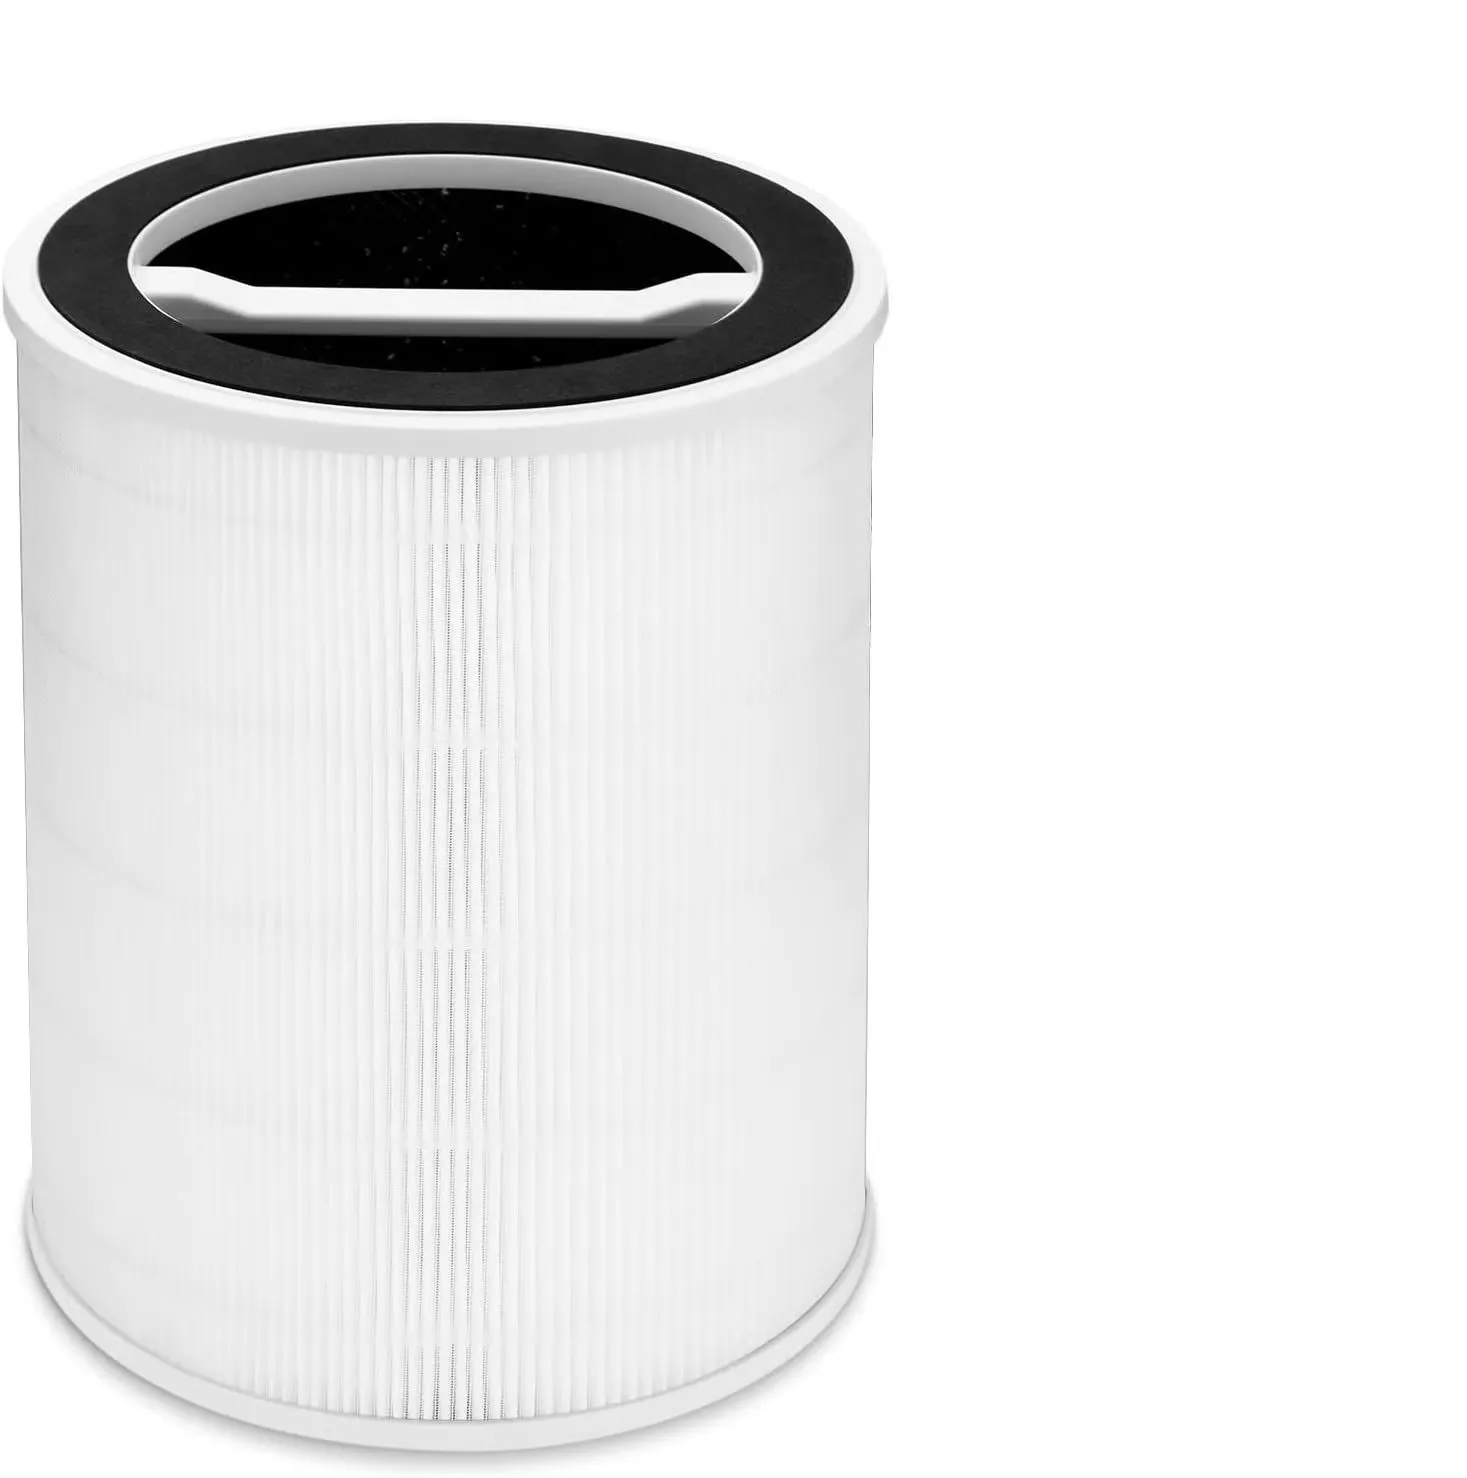 Ganiza G200 Air Purifier Replacement Filter 3-in-1 H13 True HEPA and High-Efficiency Activated Carbon Filter